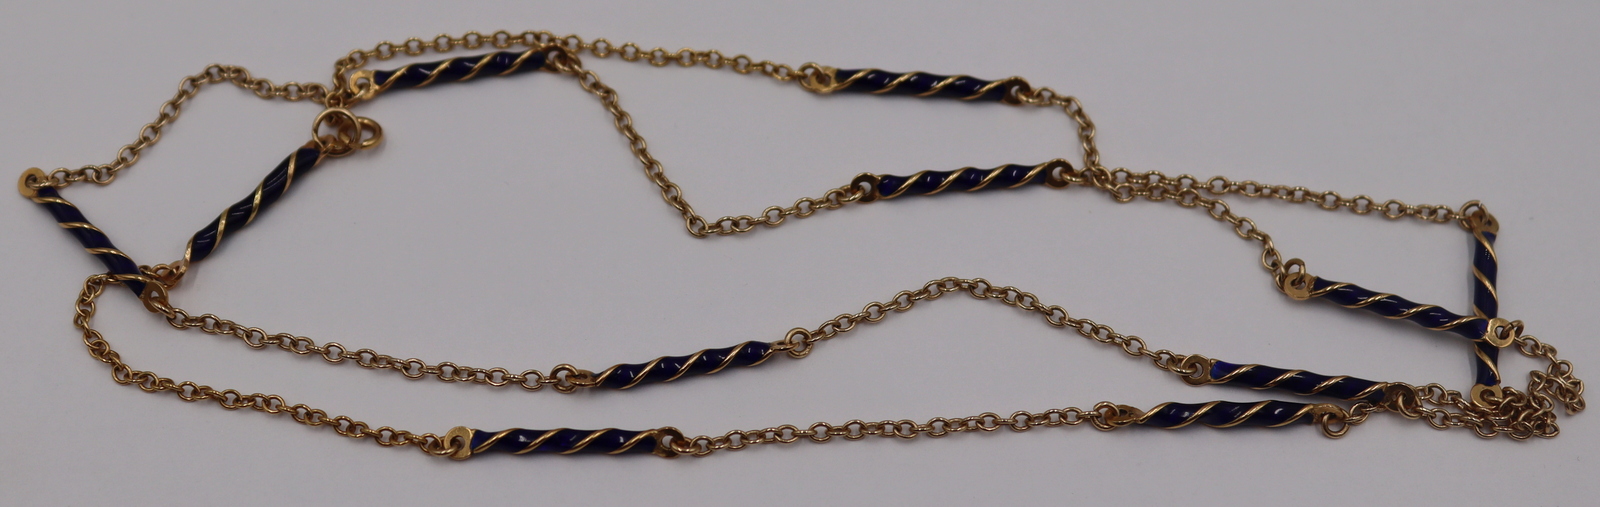 JEWELRY 14KT GOLD AND BLUE ENAMEL 3bd444